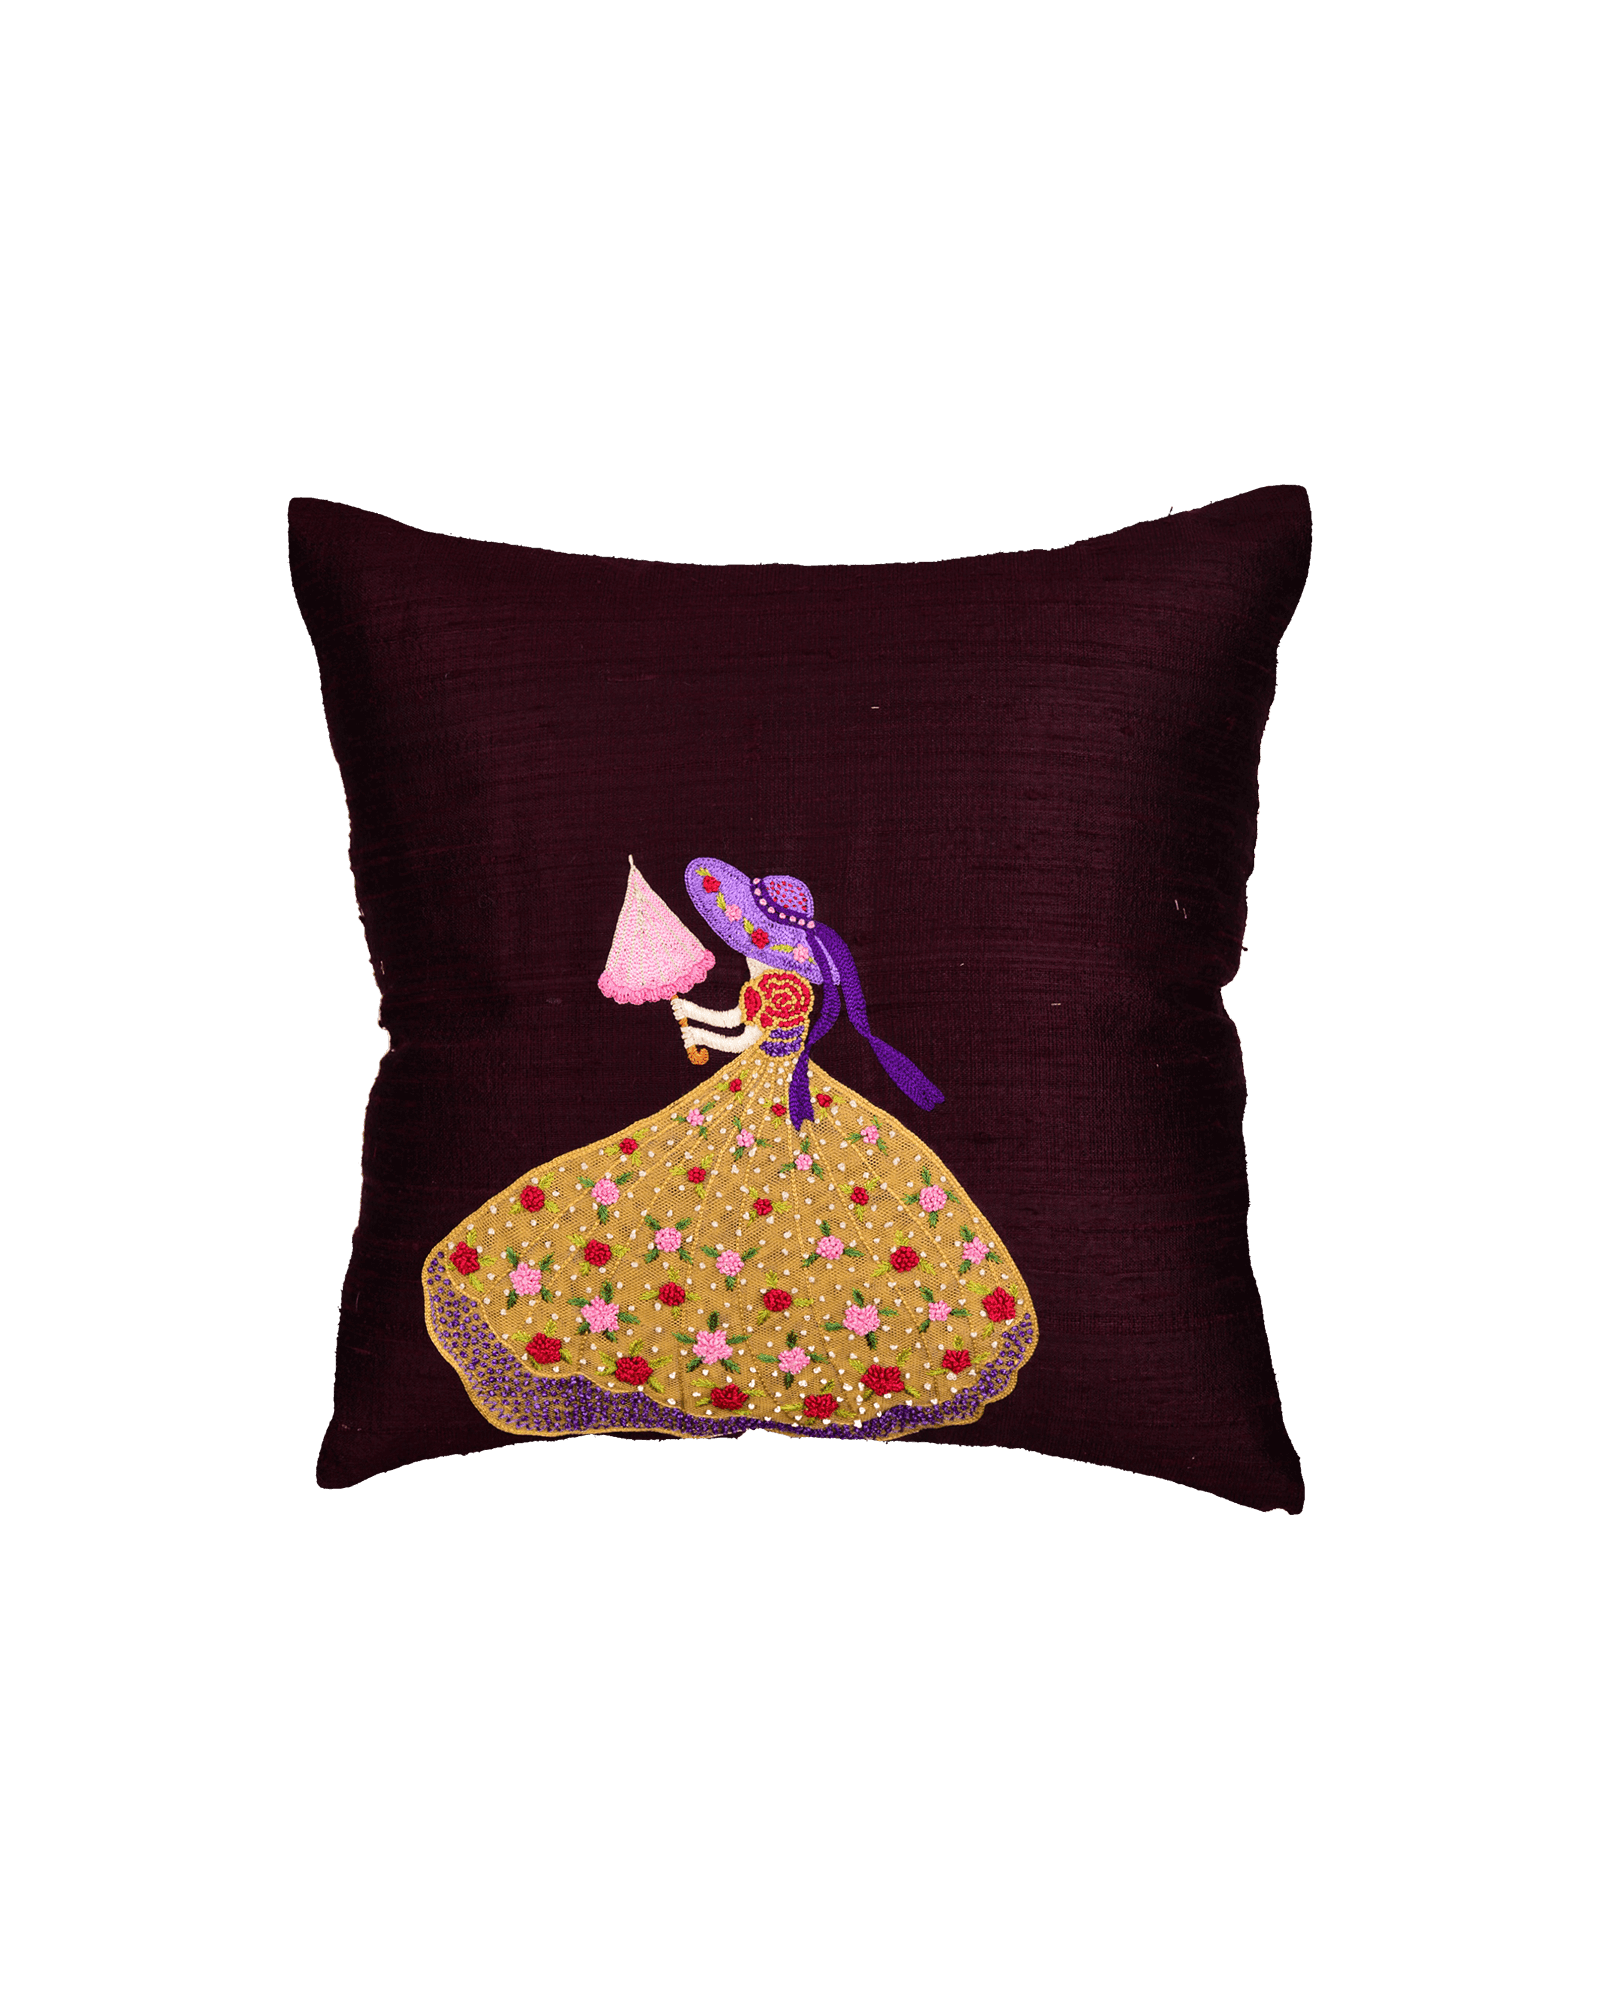 Mahogany Premium Hand-embroidered Raw Silk Centrepiece Cushion Cover 16" - By HolyWeaves, Benares